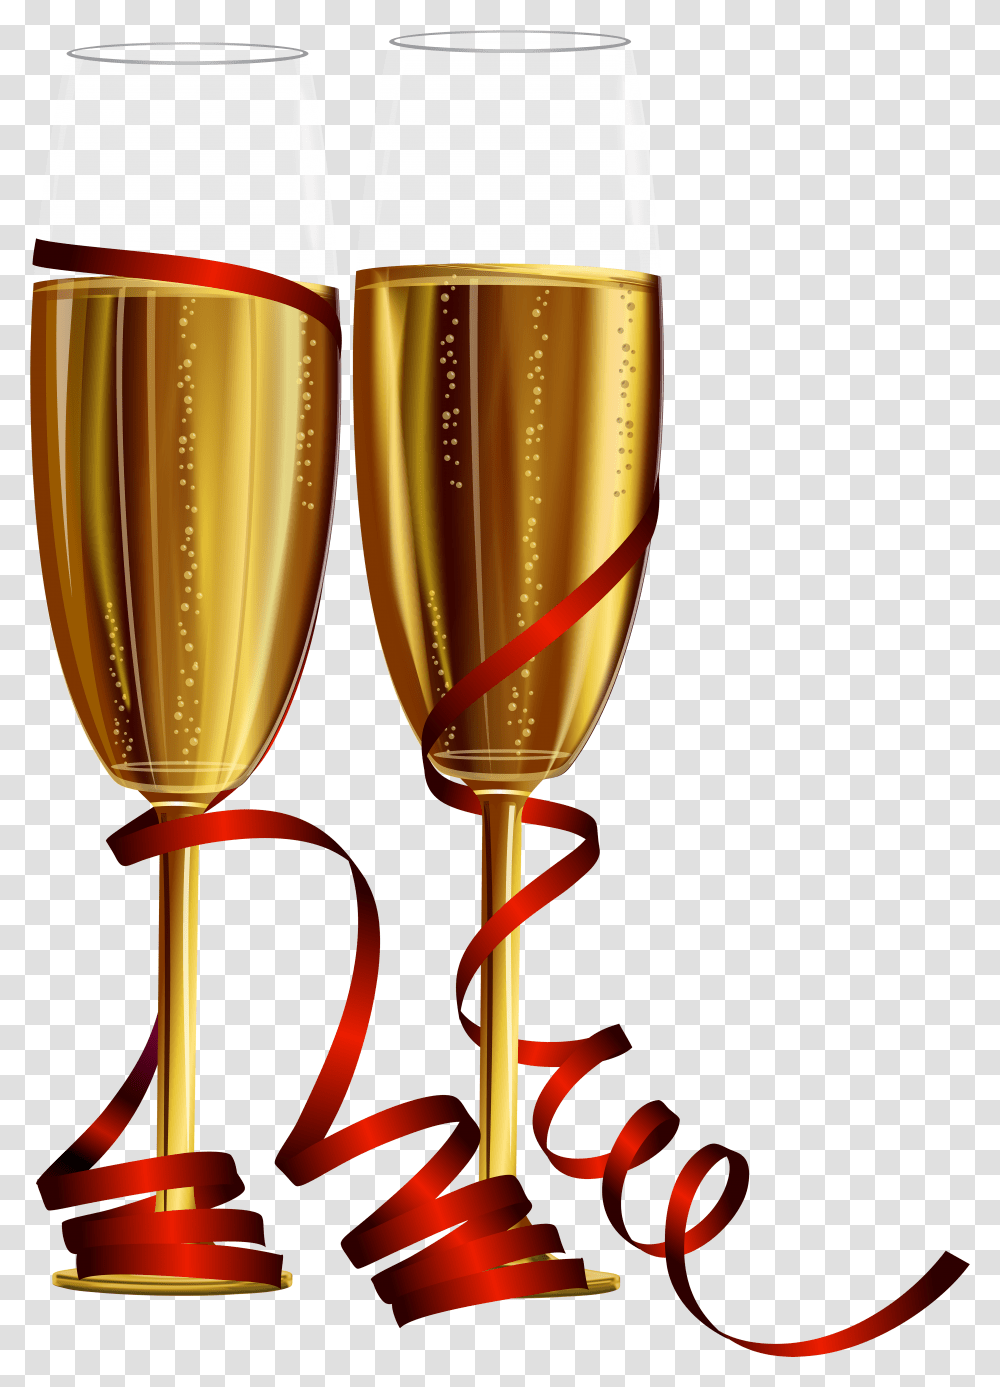 New Year Glasses Background Champagne Glasses Transparent Png